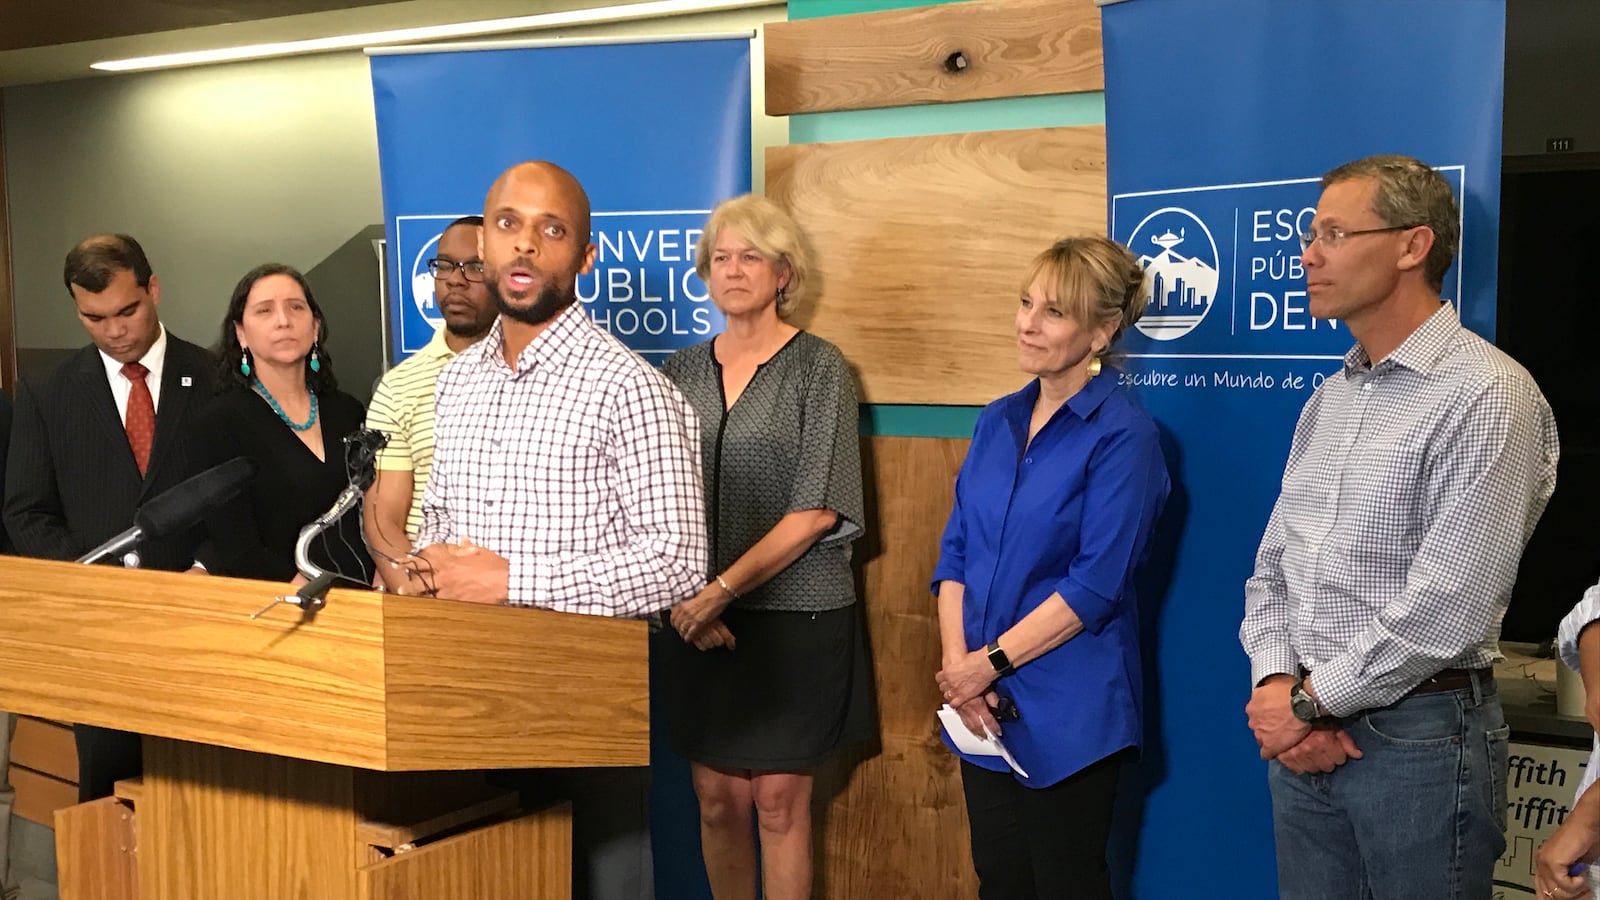 Antwan Jefferson speaks at the press conference. Jefferson is a university professor, former DPS teacher and current DPS parent.